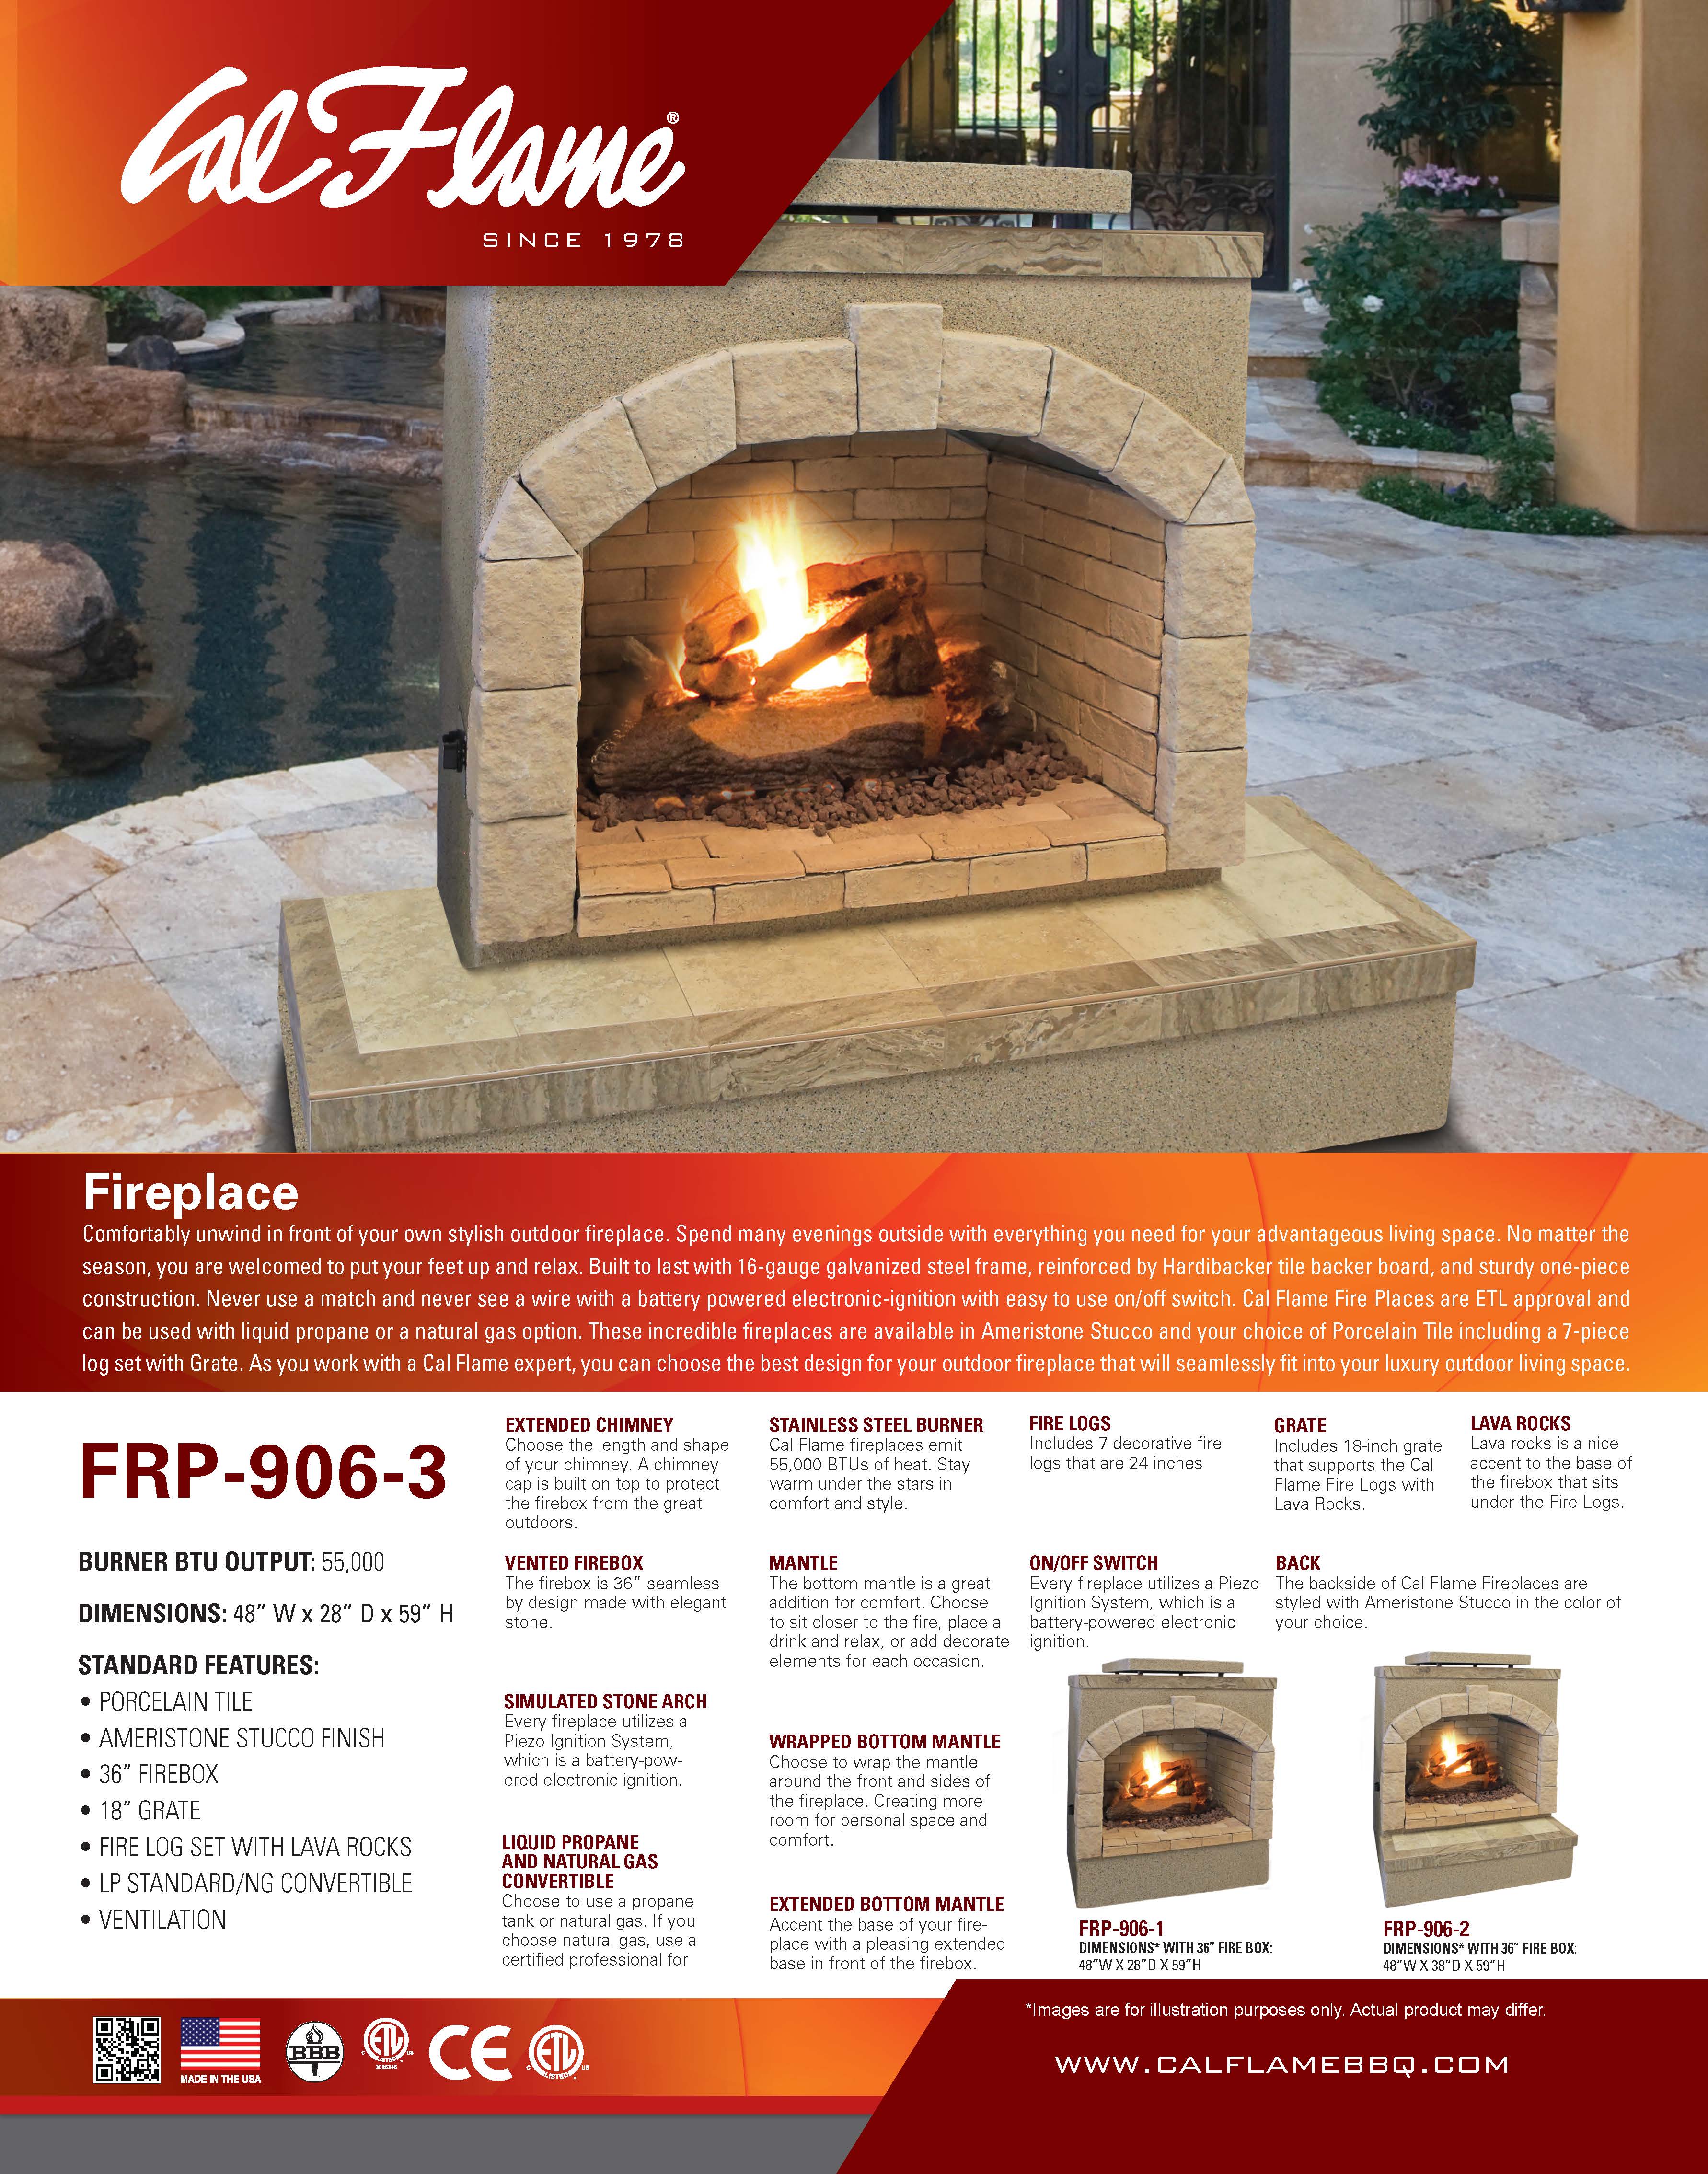 Cal Flame FRP-906-3 Fire Place